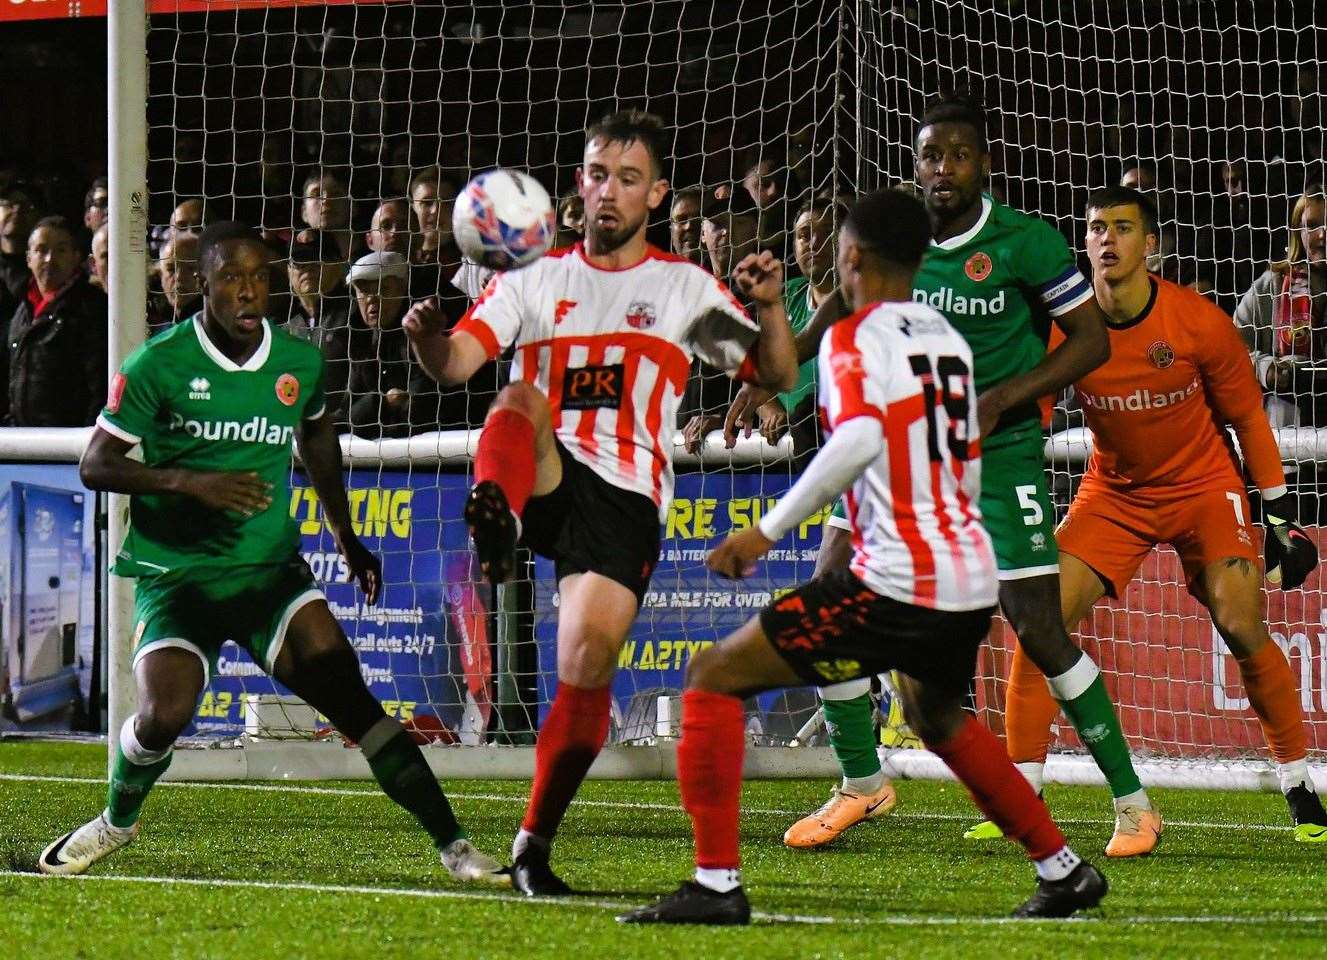 Sheppey’s Alex Willis – one of their scorers on Tuesday - in the thick of the action during Friday’s FA Cup First Round clash against League 2 Walsall at Holm Park. Picture: Marc Richards